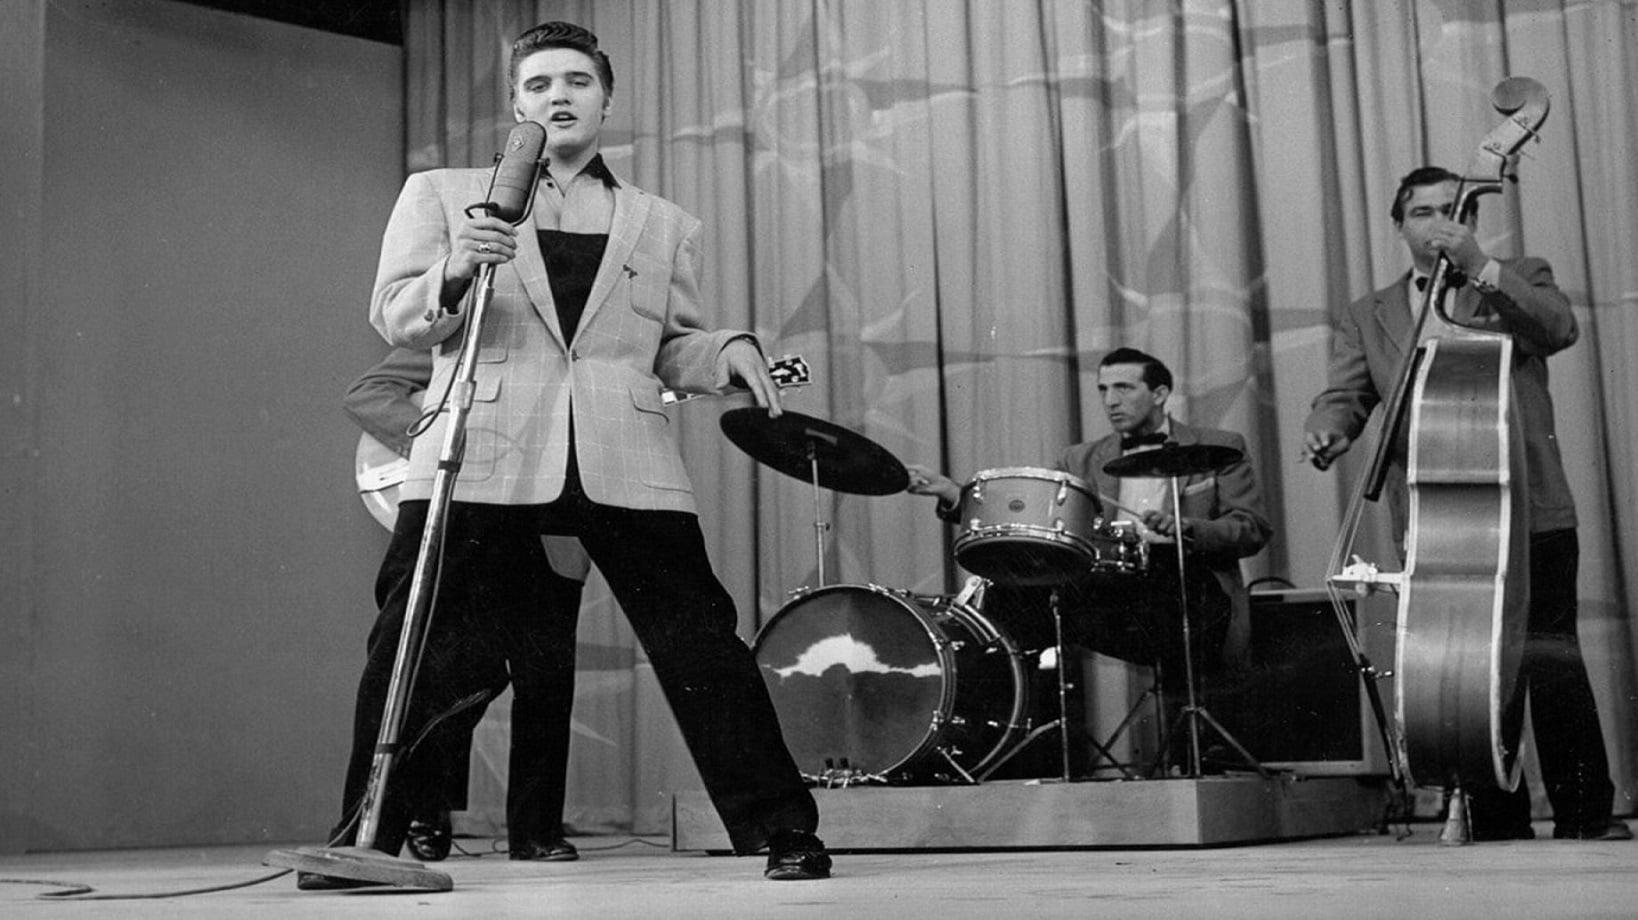 Elvis The Great Performances Vol. 3 From The Waist Up backdrop